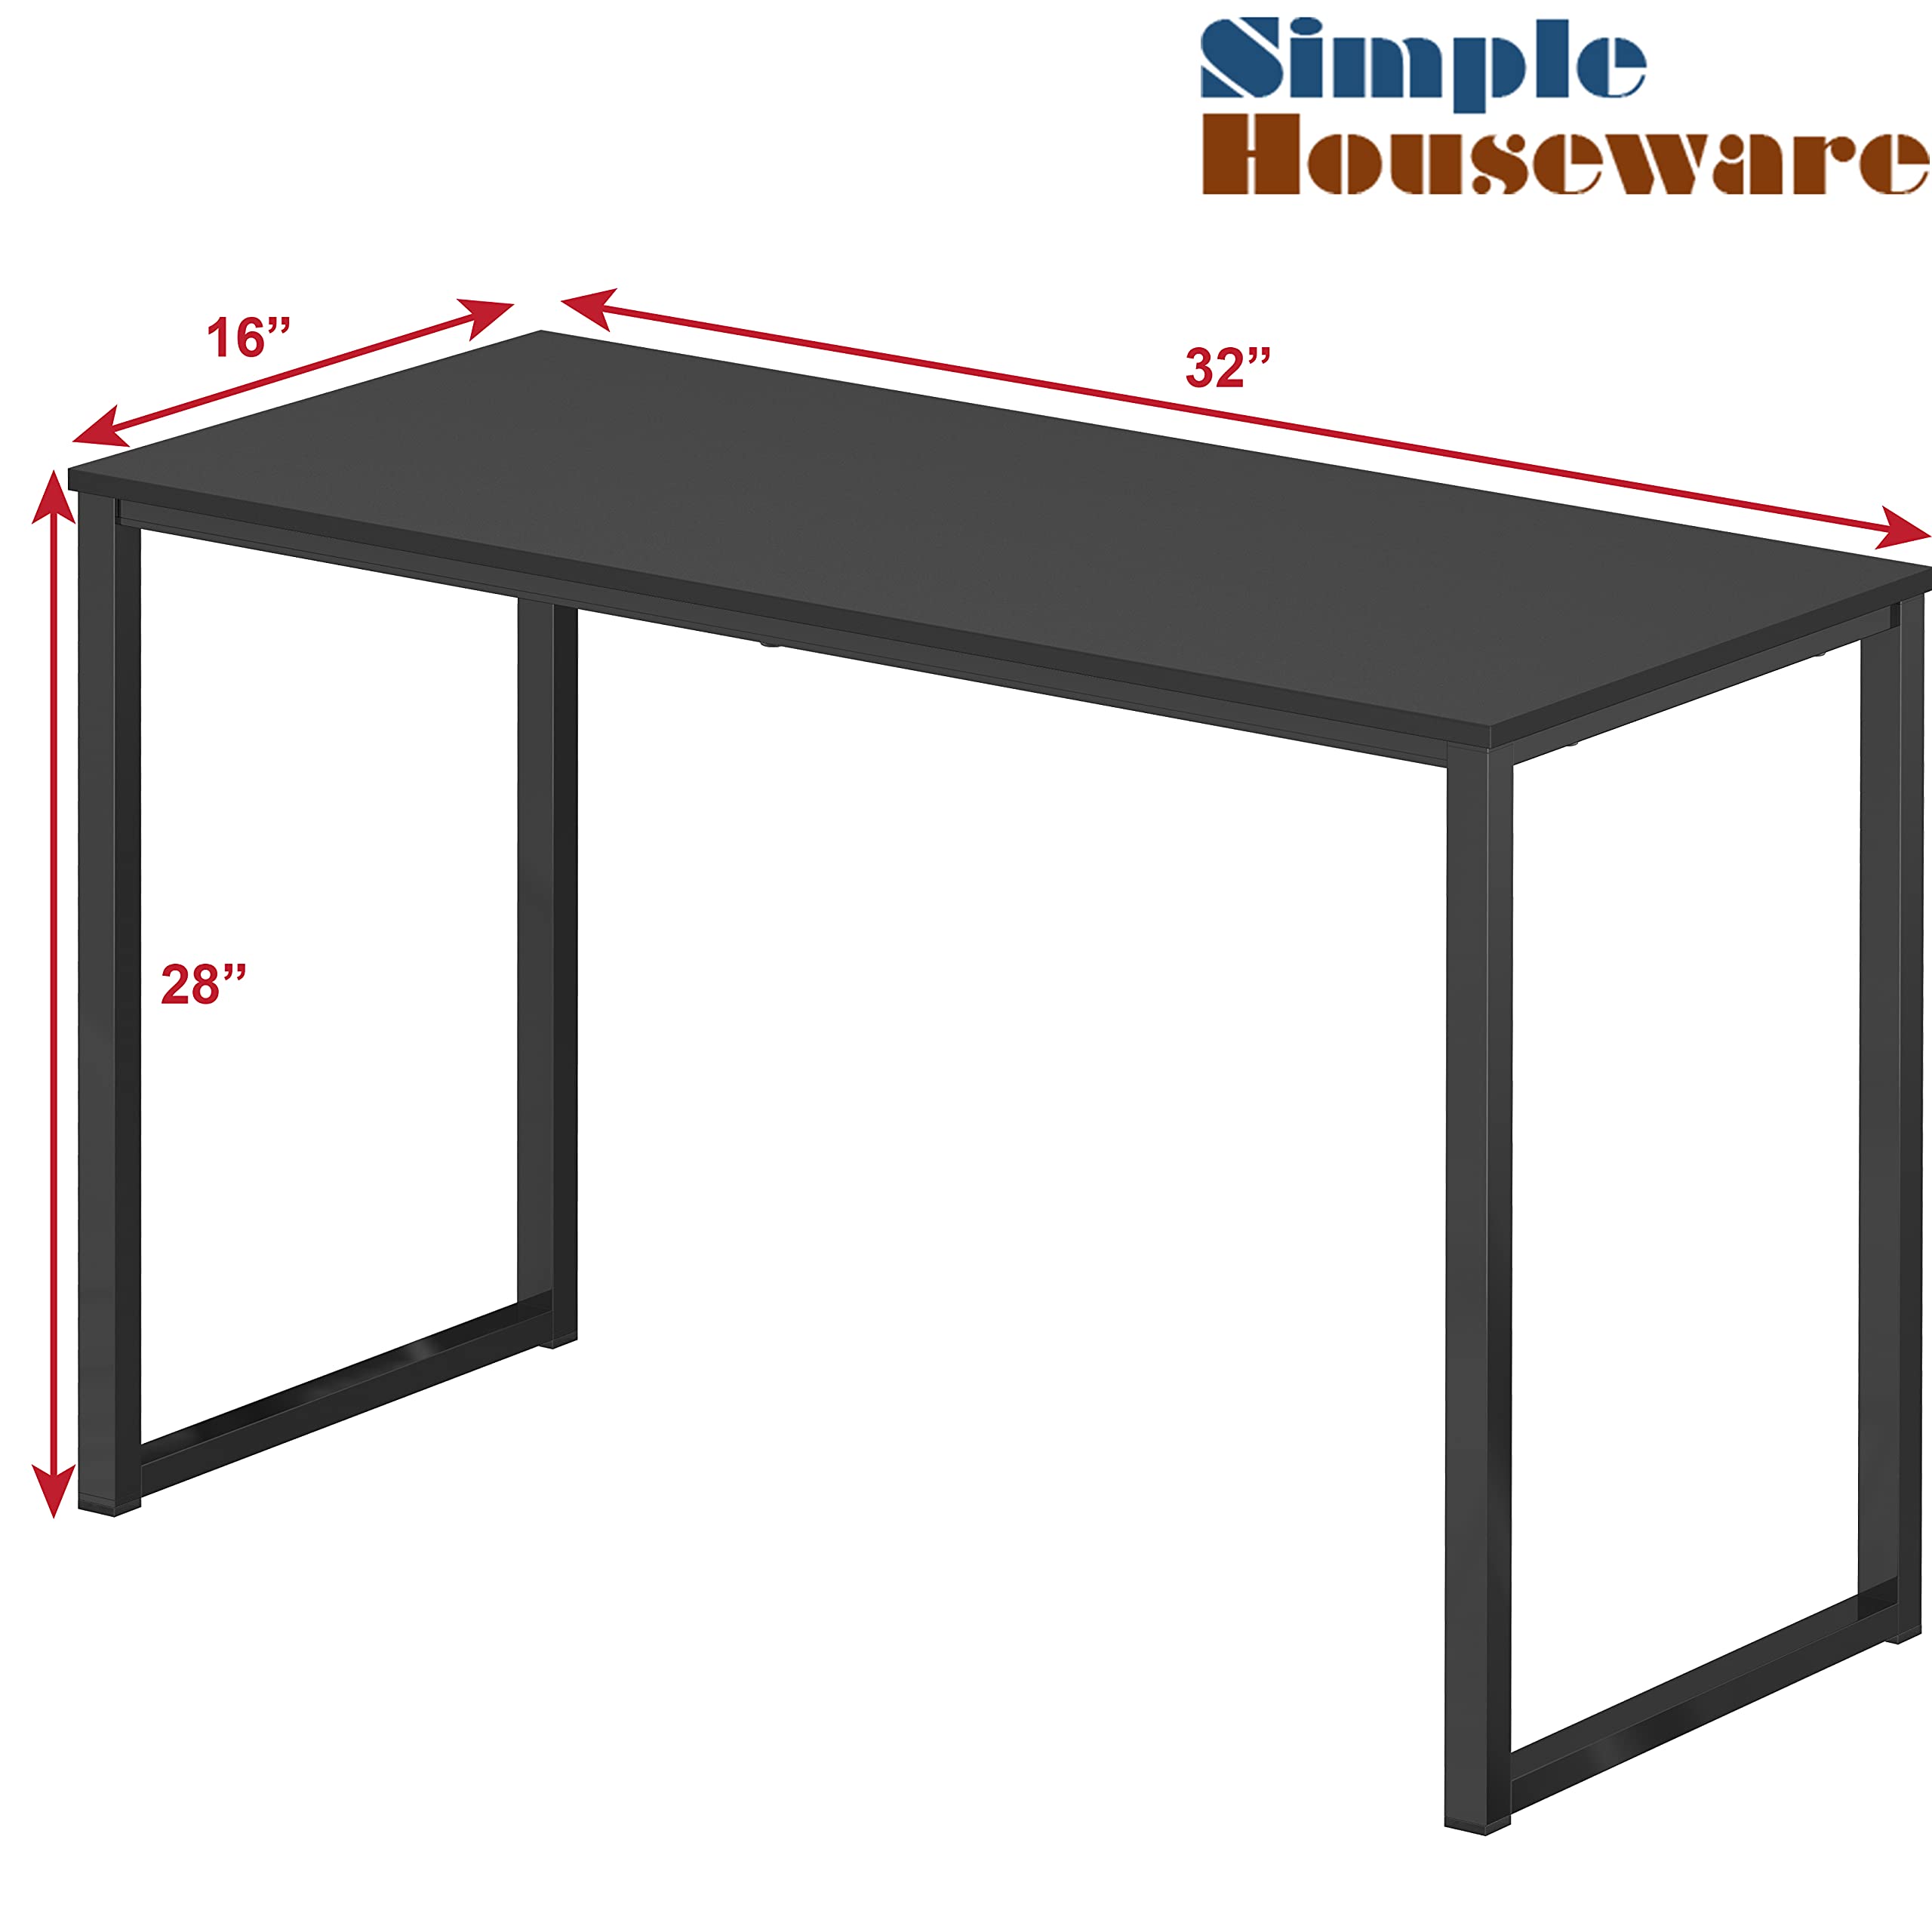 SHW Mission 32 inches office desk, Black - image 5 of 5